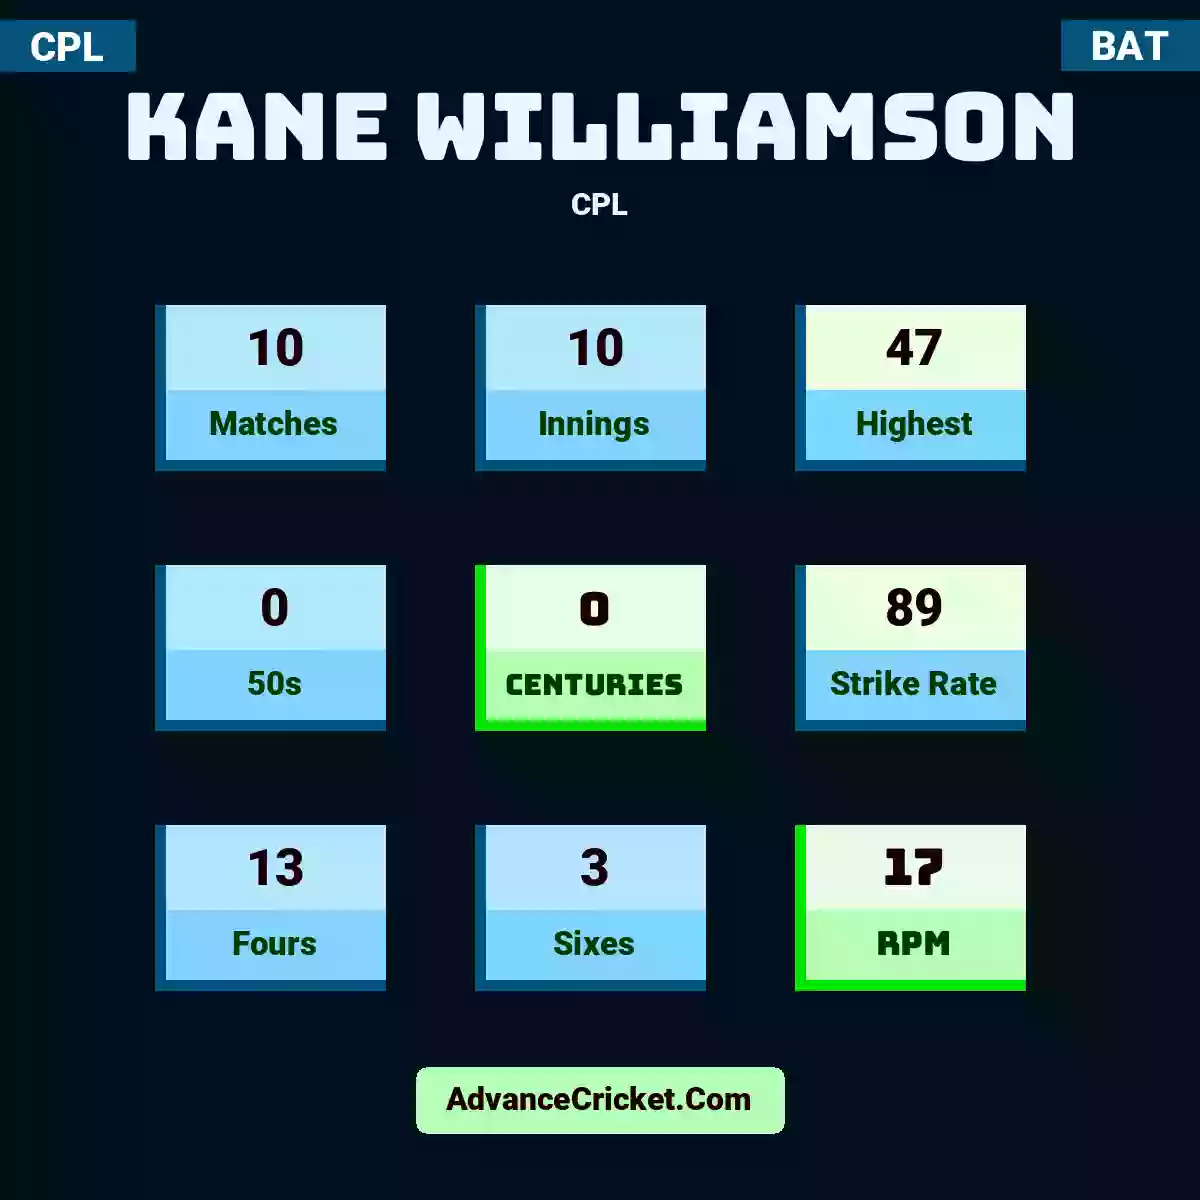 Kane Williamson CPL , Kane Williamson played 10 matches, scored 47 runs as highest, 0 half-centuries, and 0 centuries, with a strike rate of 89. K.Williamson hit 13 fours and 3 sixes, with an RPM of 17.